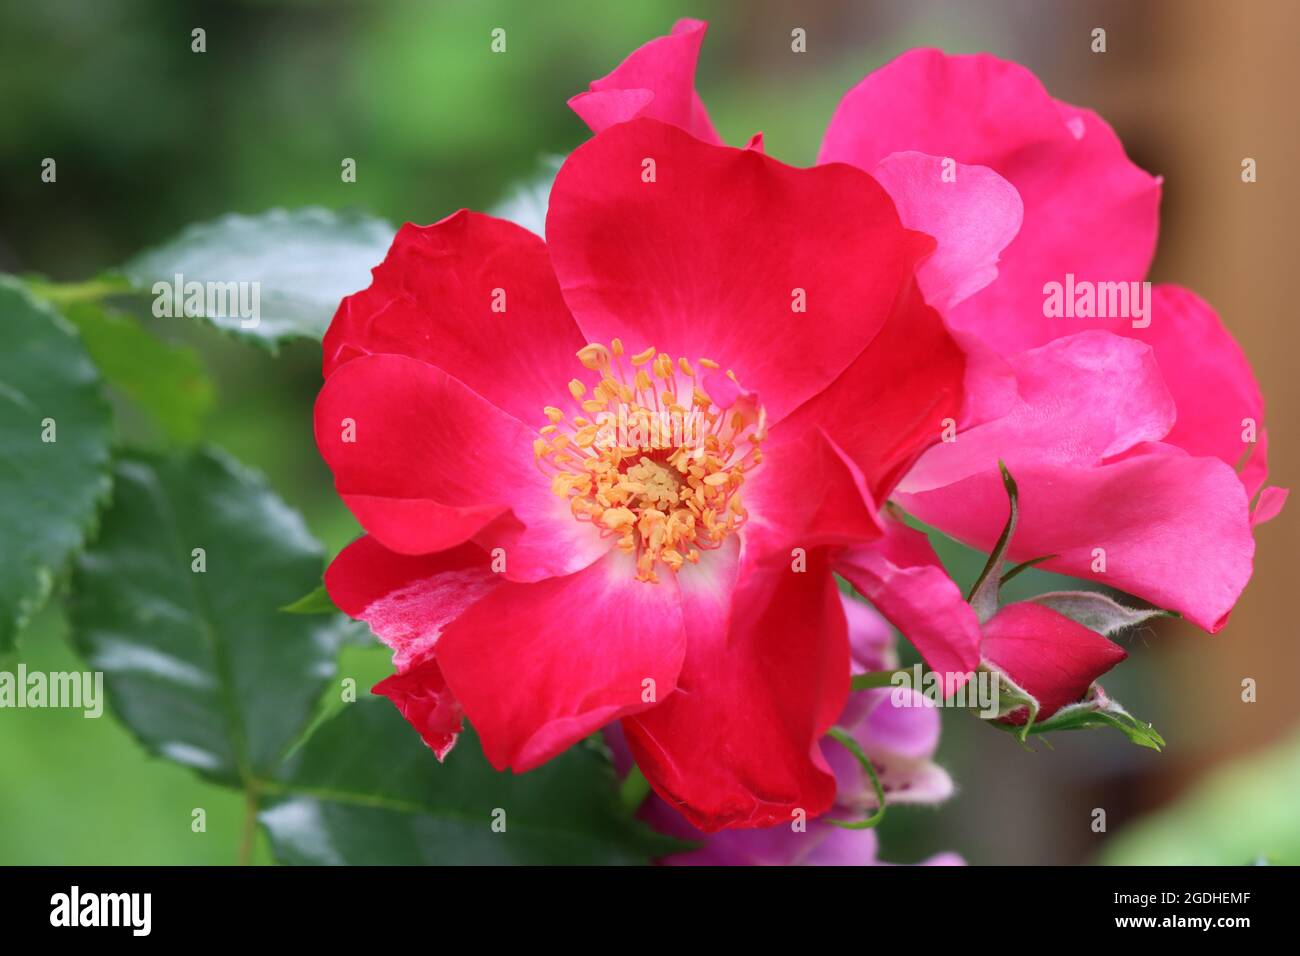 a pink rose blossom against a green natural background Stock Photo